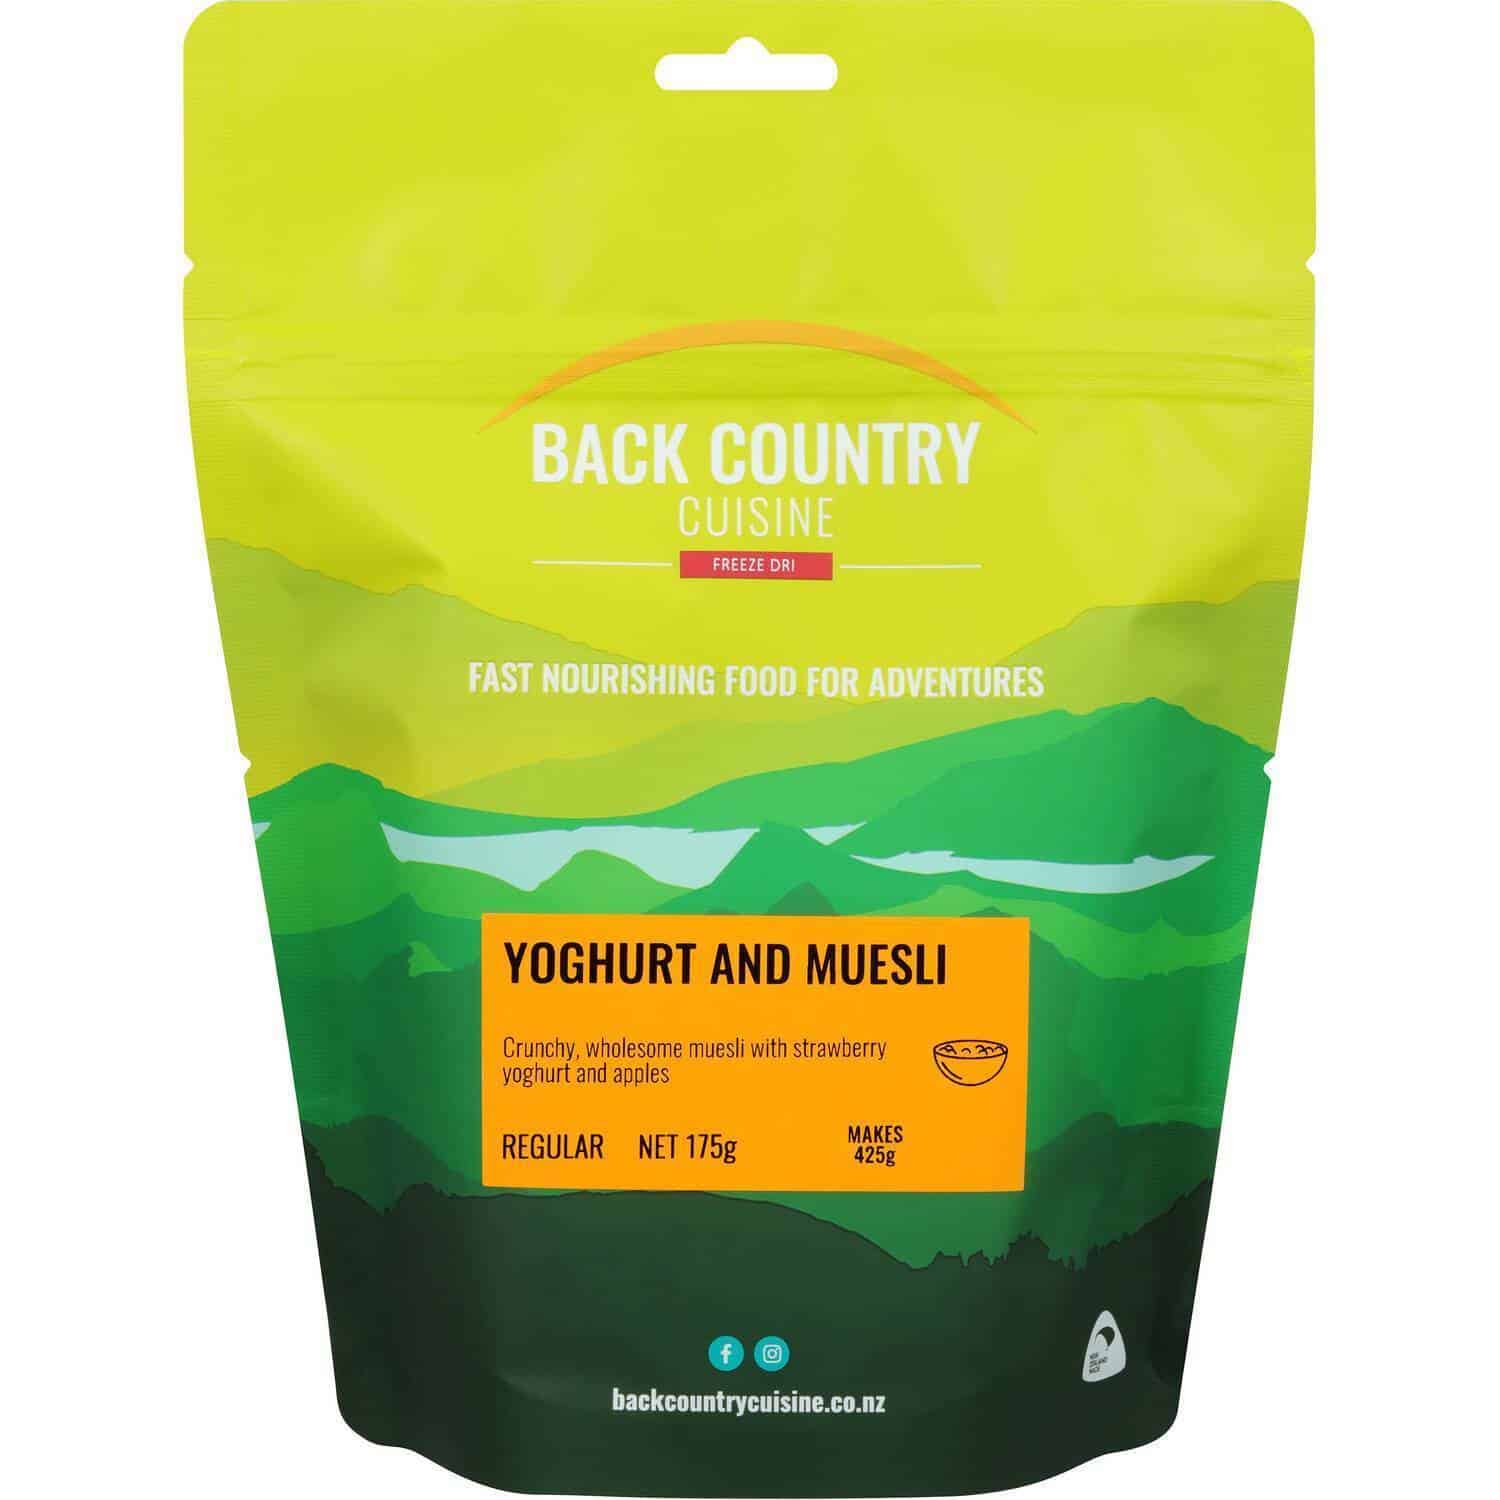 Back Country Cuisine Yoghurt & Museli Regular - Tramping Food and Accessories sold by Venture Outdoors NZ